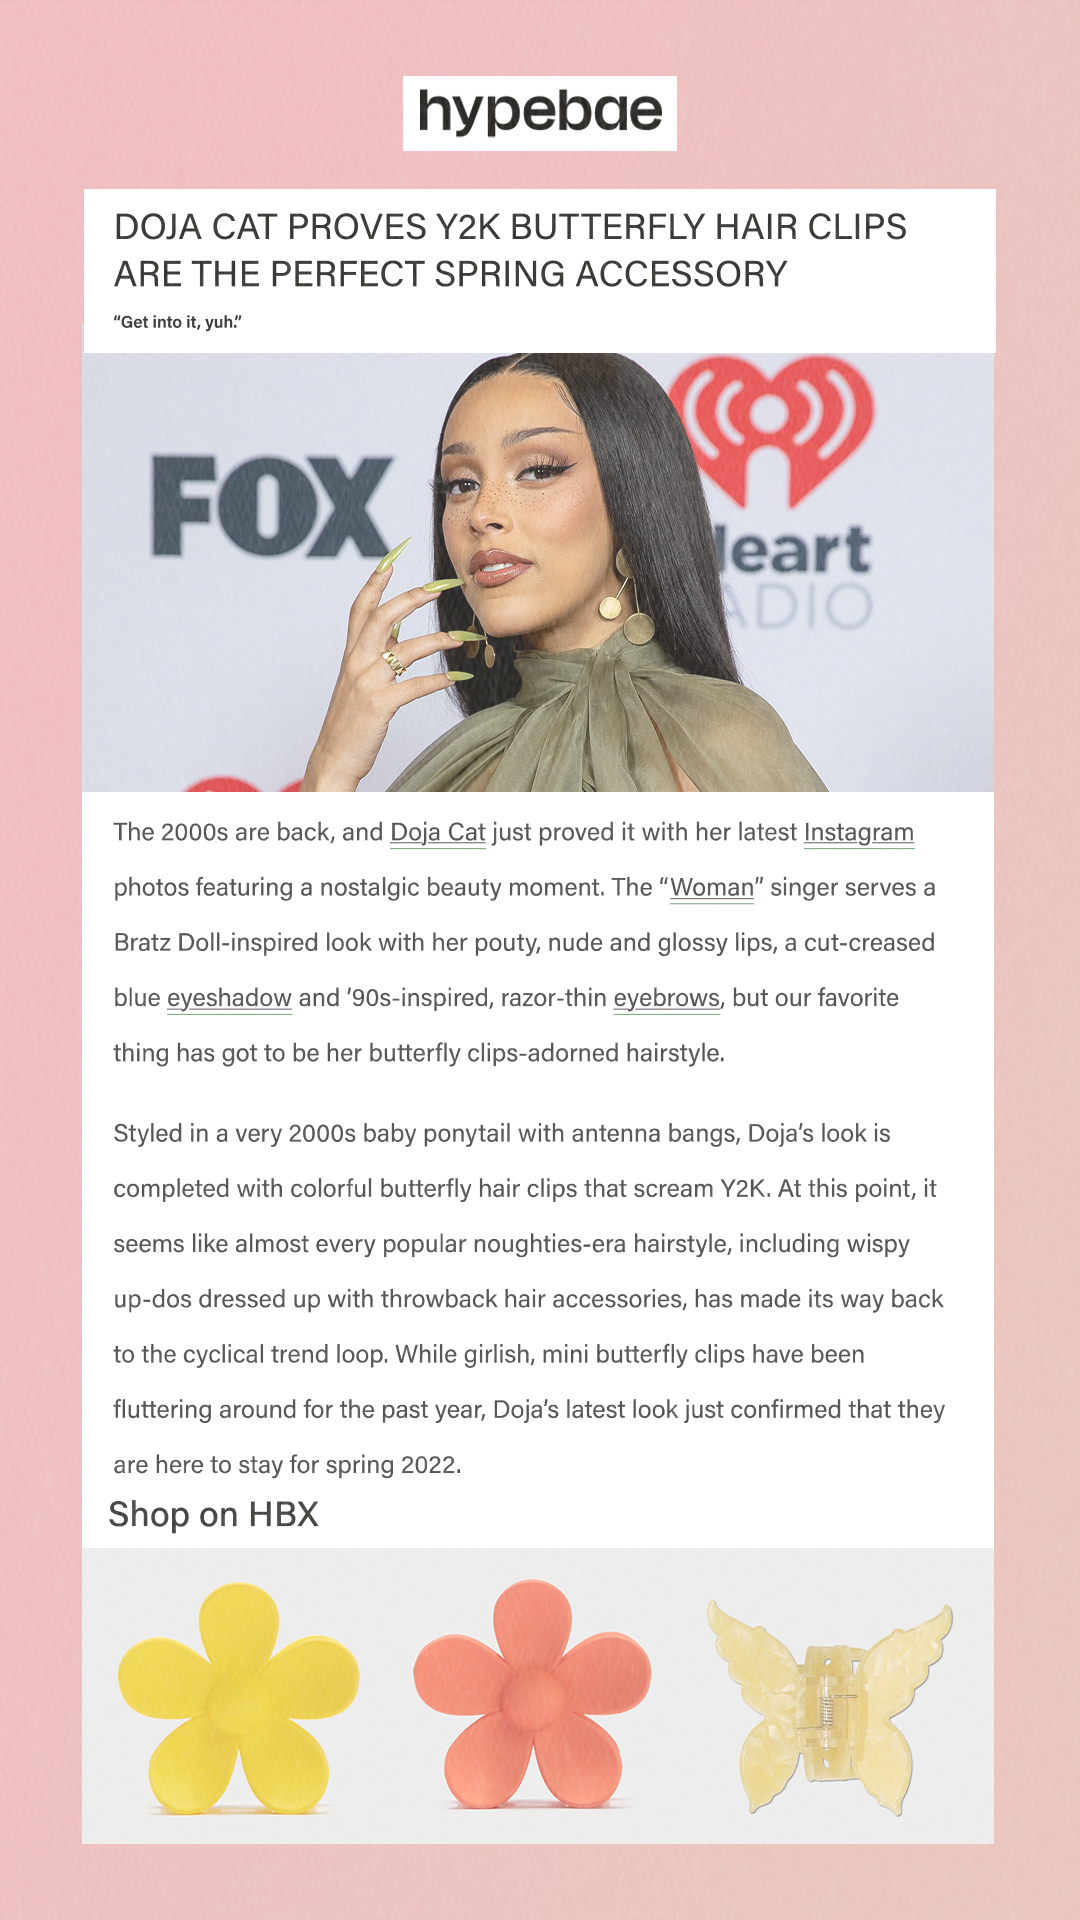 Doja Cat Proves Y2K Butterfly Hair Clips Are the Perfect Spring Accessory Get into it, yuh. The 2000s are back, and Doja Cat just proved it with her latest Instagram photos featuring a nostalgic beauty moment. The “Woman” singer serves a Bratz Doll-inspired look with her pouty, nude and glossy lips, a cut-creased blue eyeshadow and ’90s-inspired, razor-thin eyebrows, but our favorite thing has got to be her butterfly clips-adorned hairstyle. Styled in a very 2000s baby ponytail with antenna bangs, Doja’s look is completed with colorful butterfly hair clips that scream Y2K. At this point, it seems like almost every popular noughties-era hairstyle, including wispy up-dos dressed up with throwback hair accessories, has made its way back to the cyclical trend loop. While girlish, mini butterfly clips have been fluttering around for the past year, Doja’s latest look just confirmed that they are here to stay for spring 2022. Shop on HBX